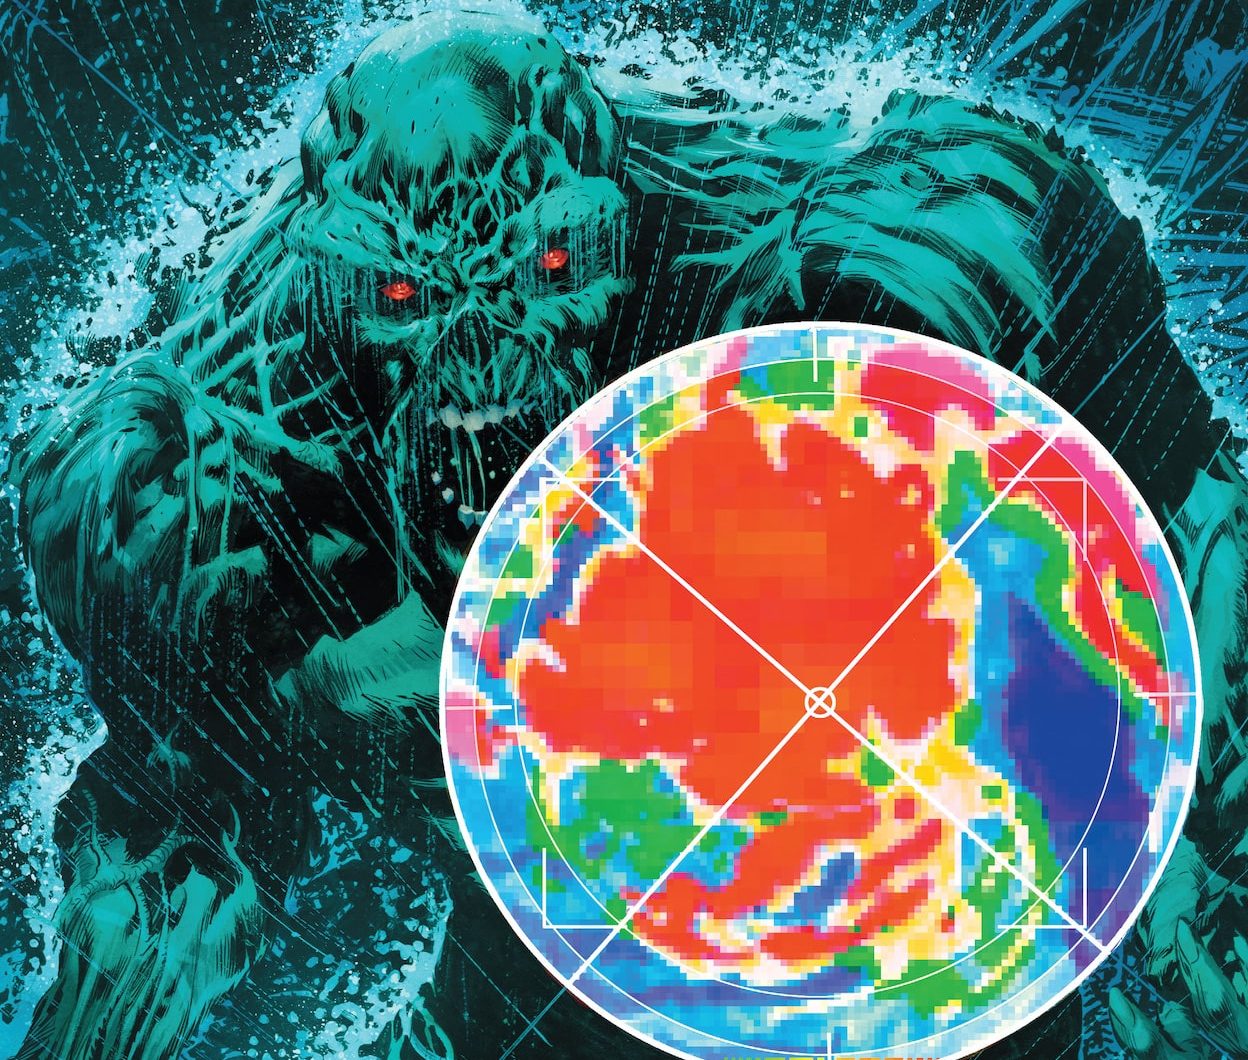 'The Swamp Thing' #6 review: Pulled from the mud